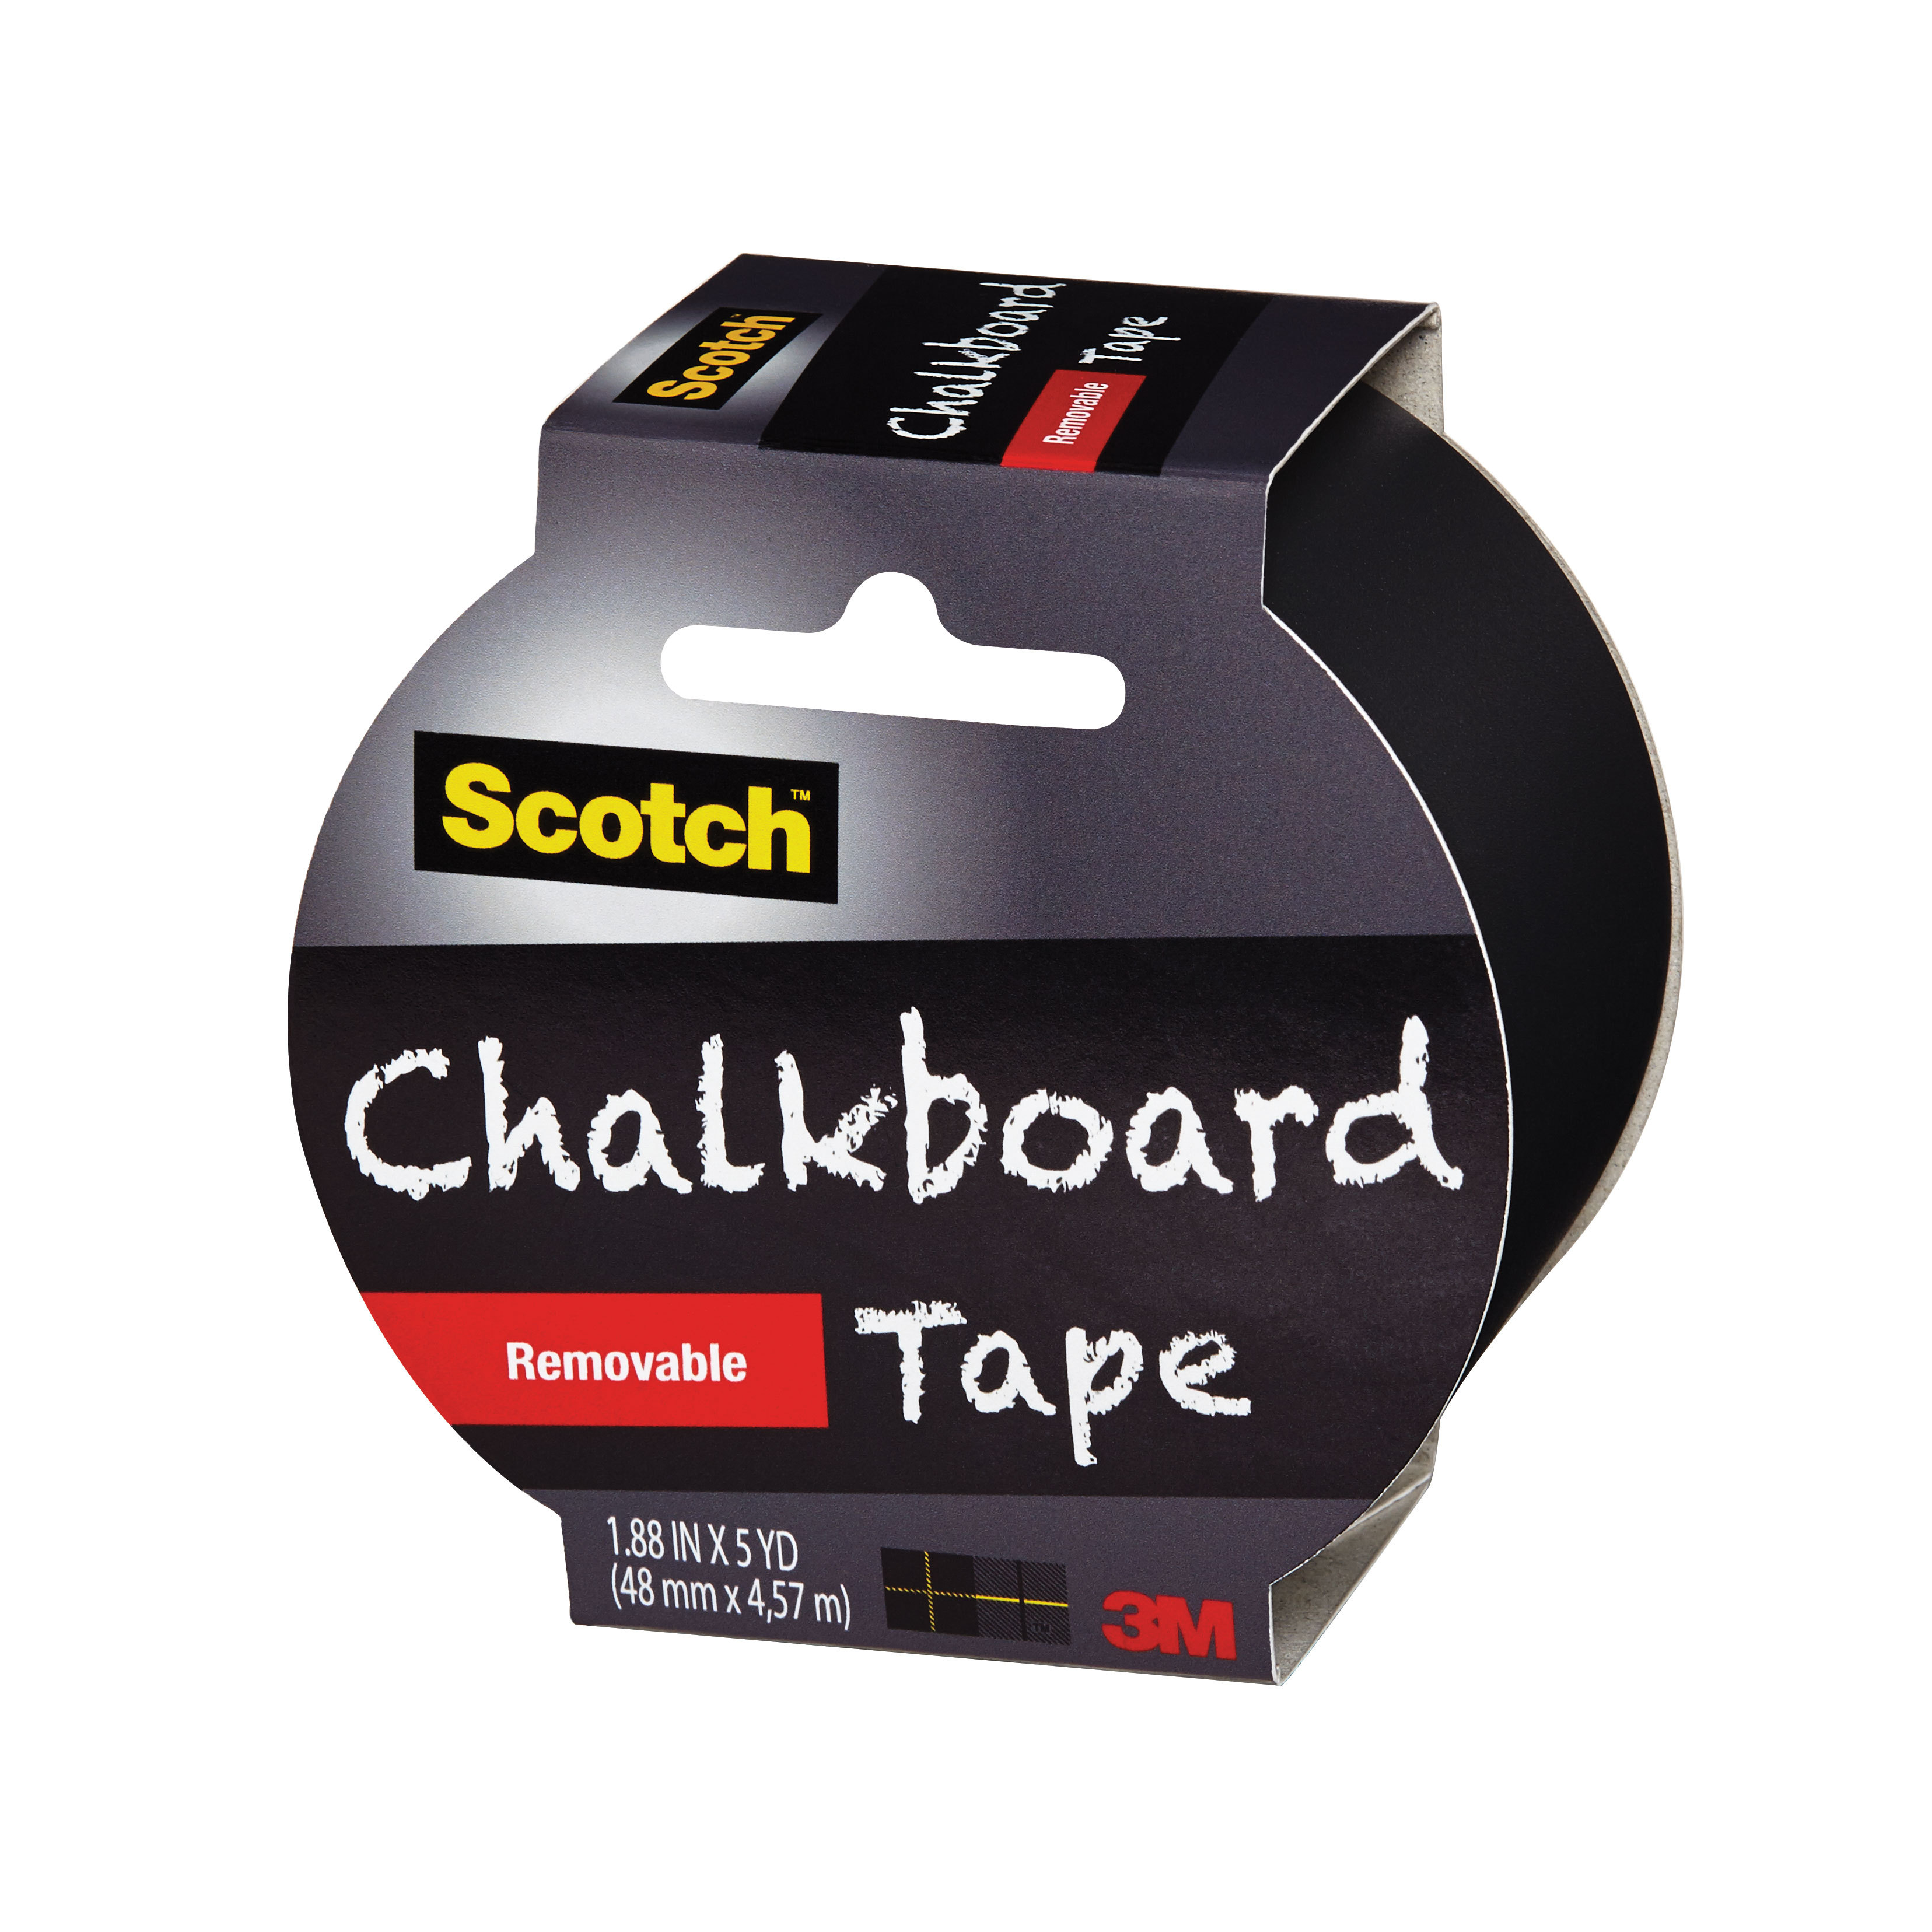 3M Introduces Erasable and Removable Chalkboard & Dry Erase Tapes